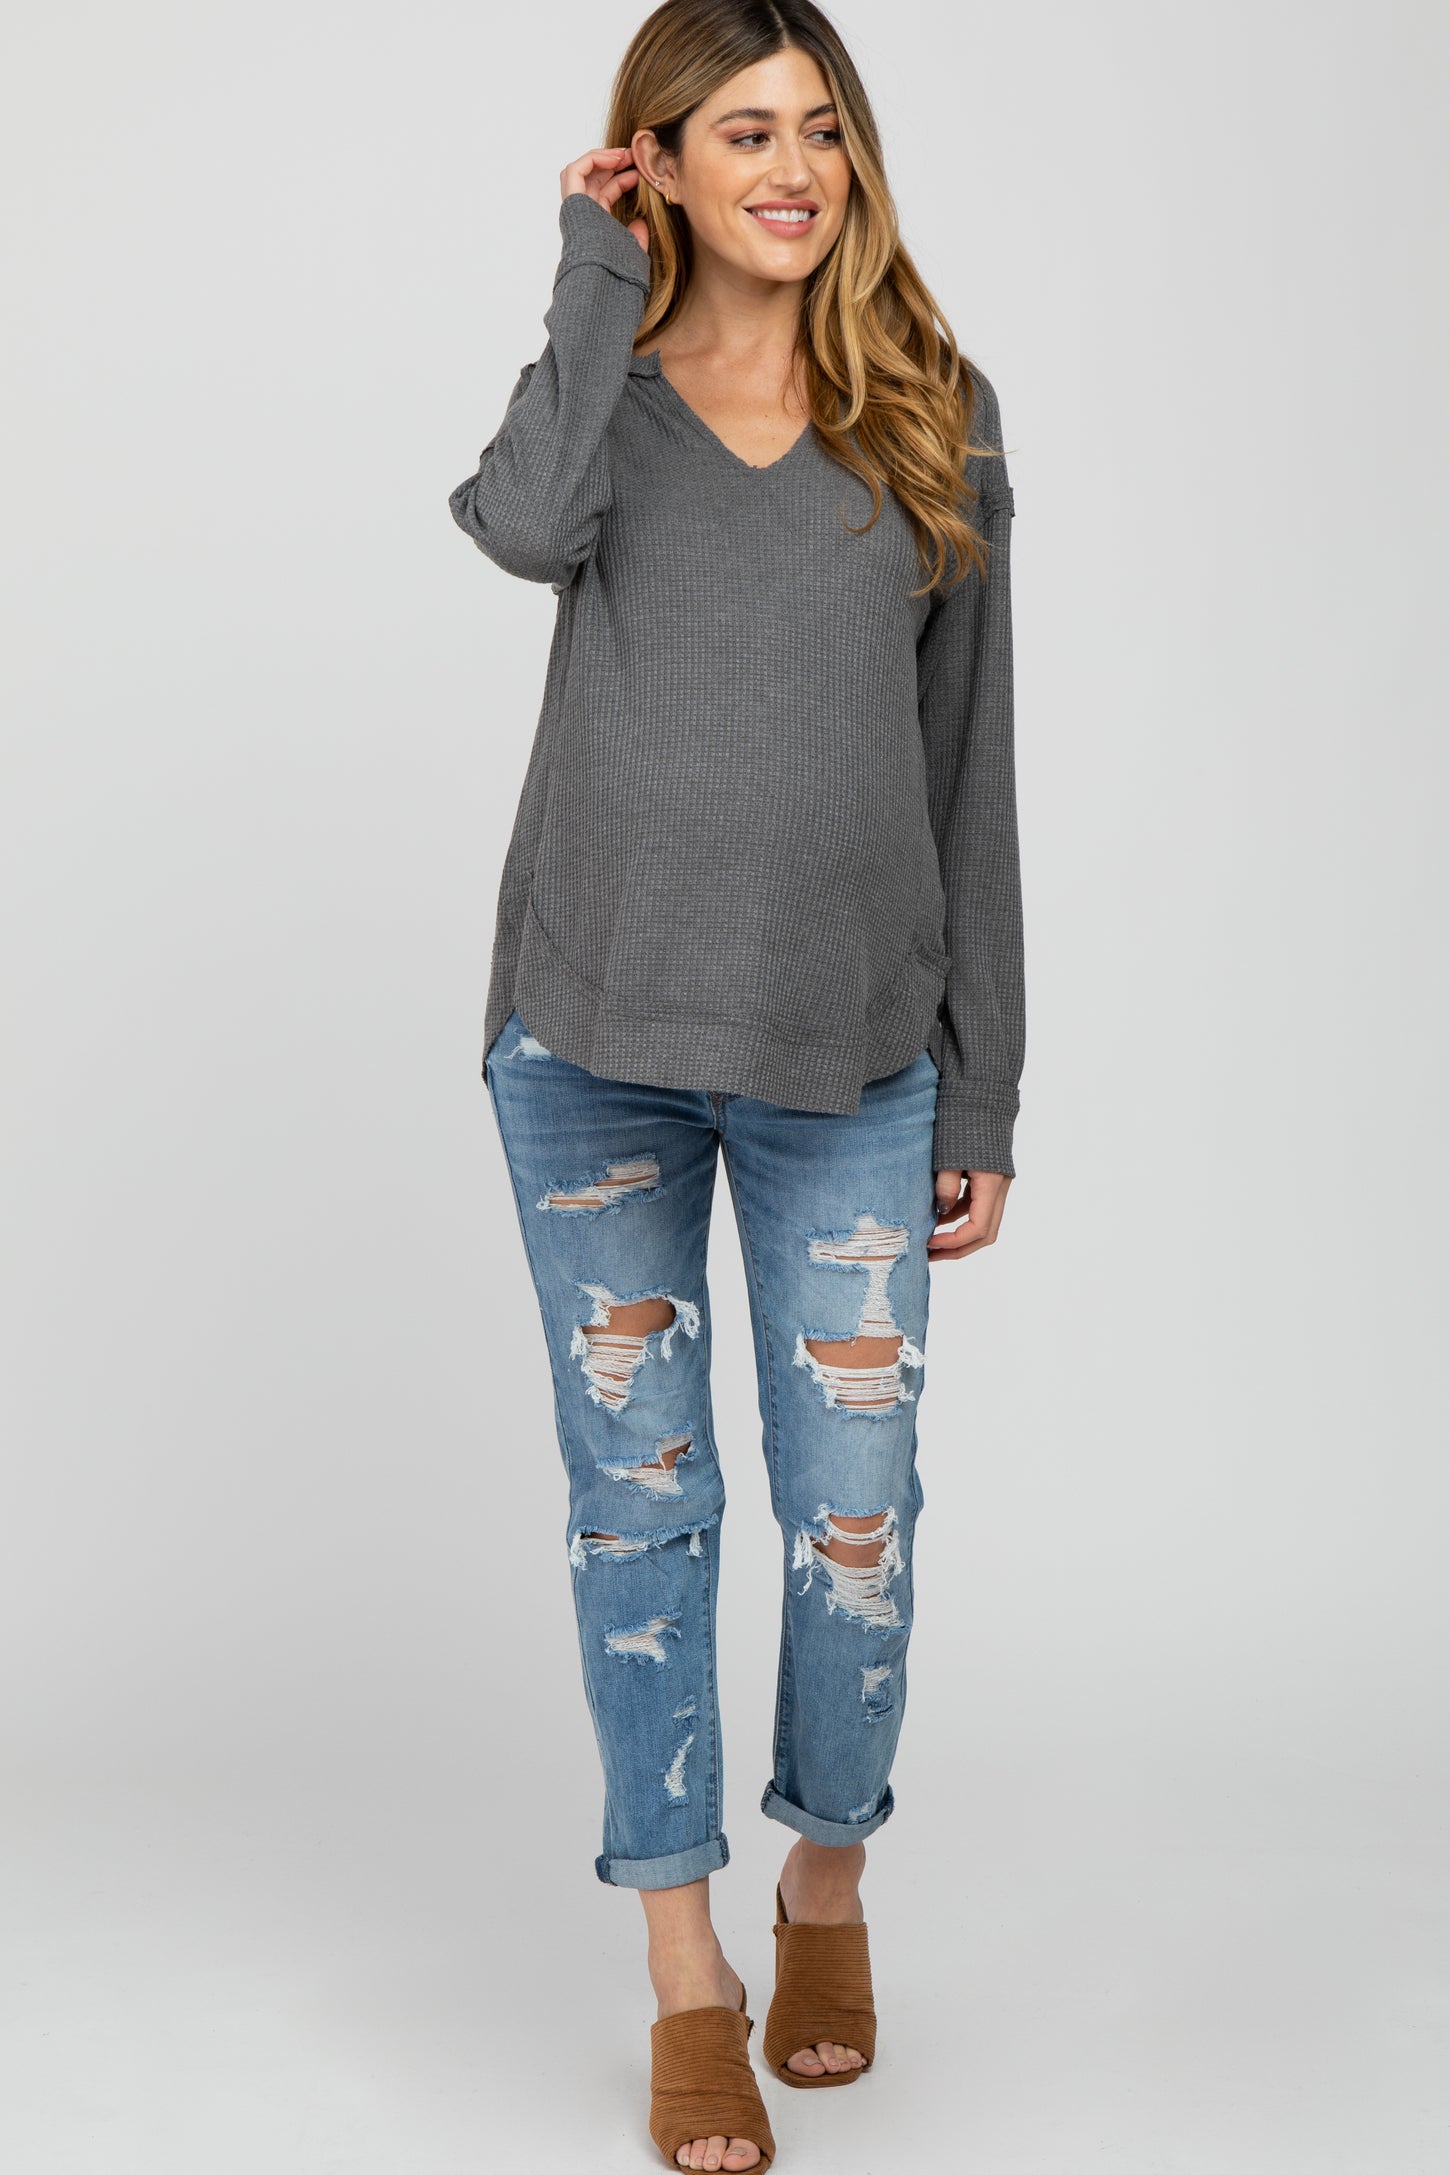 Charcoal Split Neck Exposed Seam Maternity Long Sleeve Top